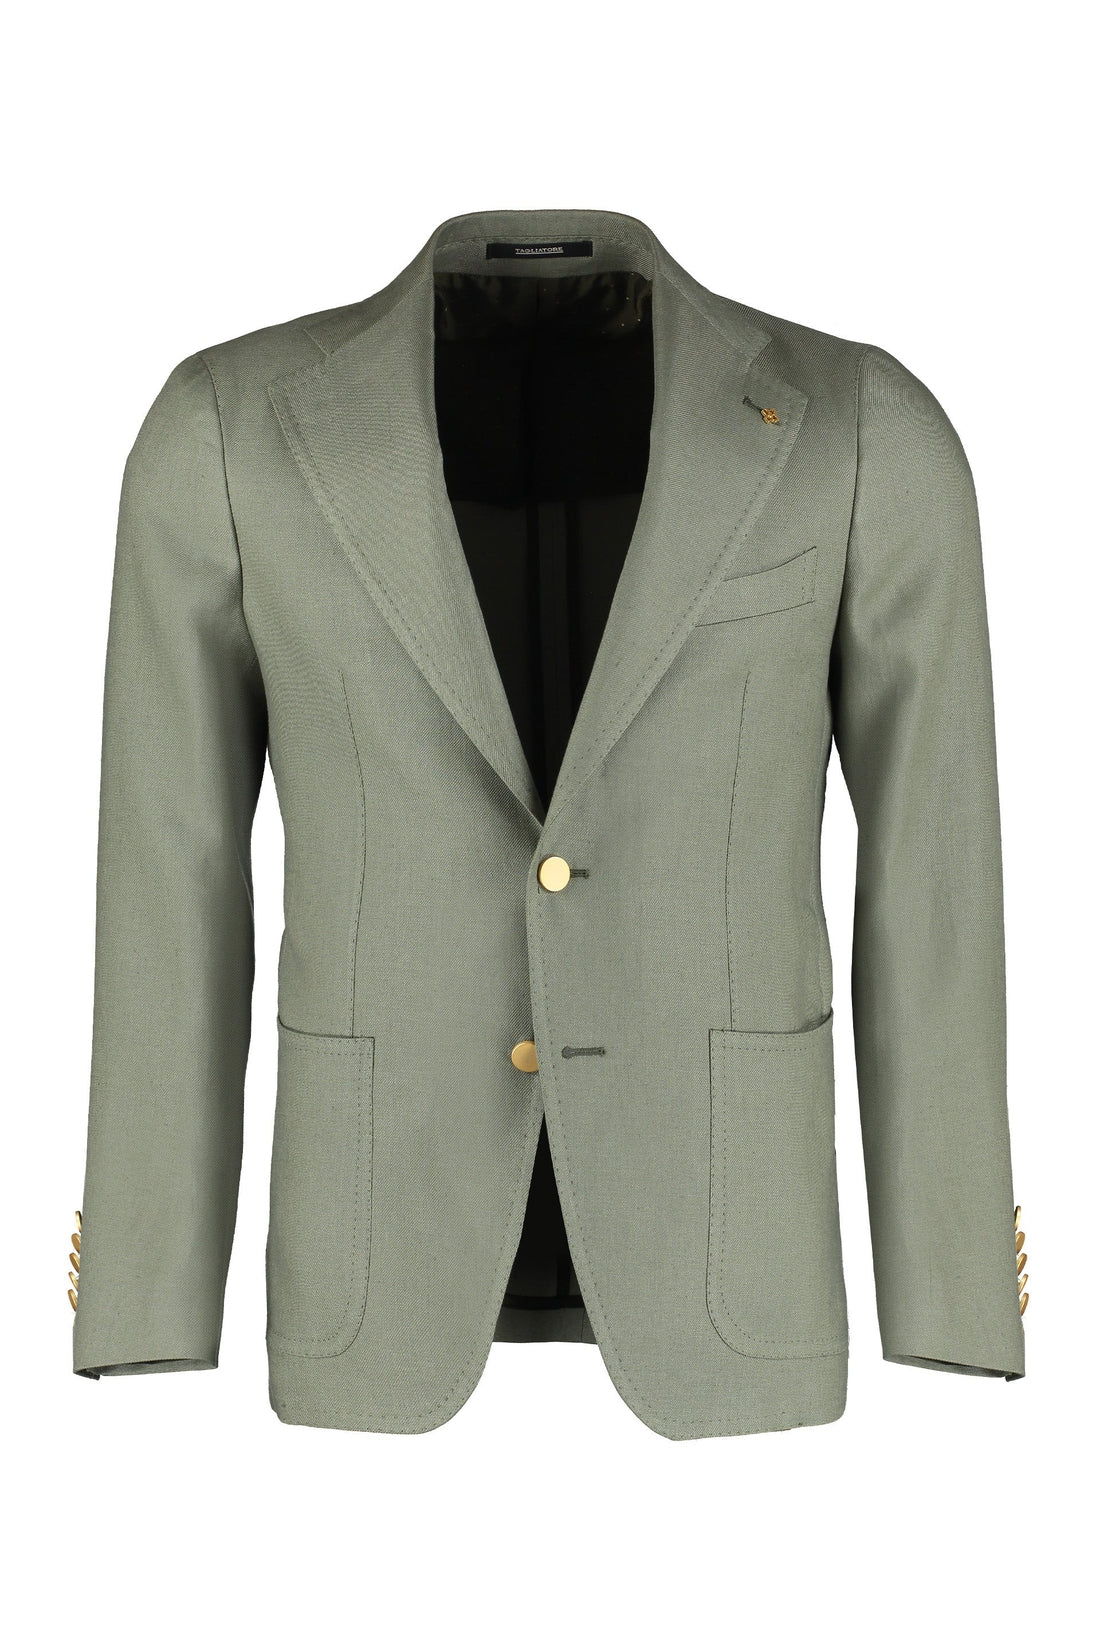 Tagliatore-OUTLET-SALE-Single-breasted two-button jacket-ARCHIVIST